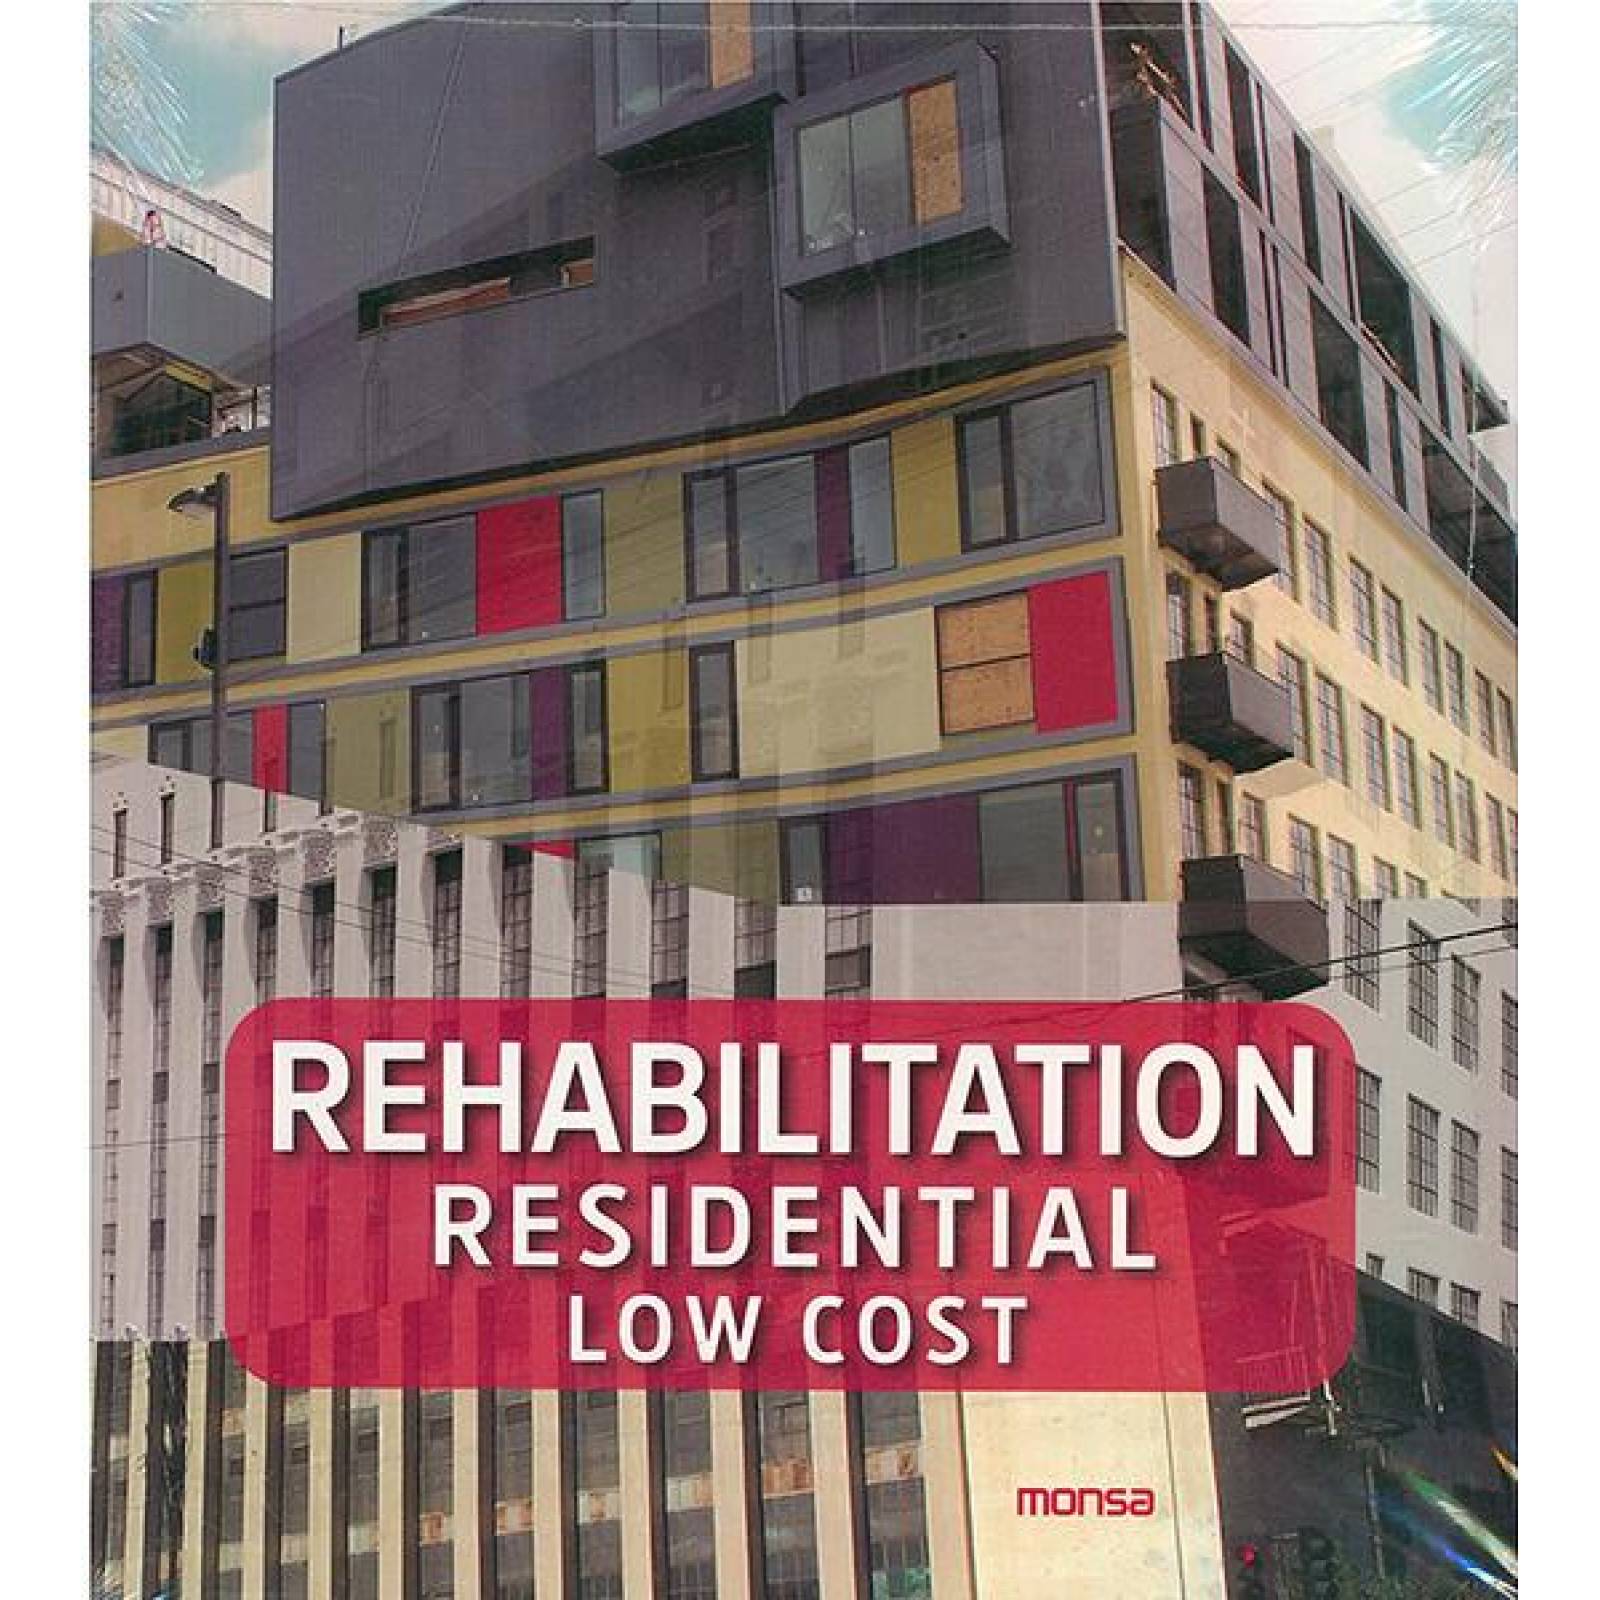 Rehabilitation residential low cost 